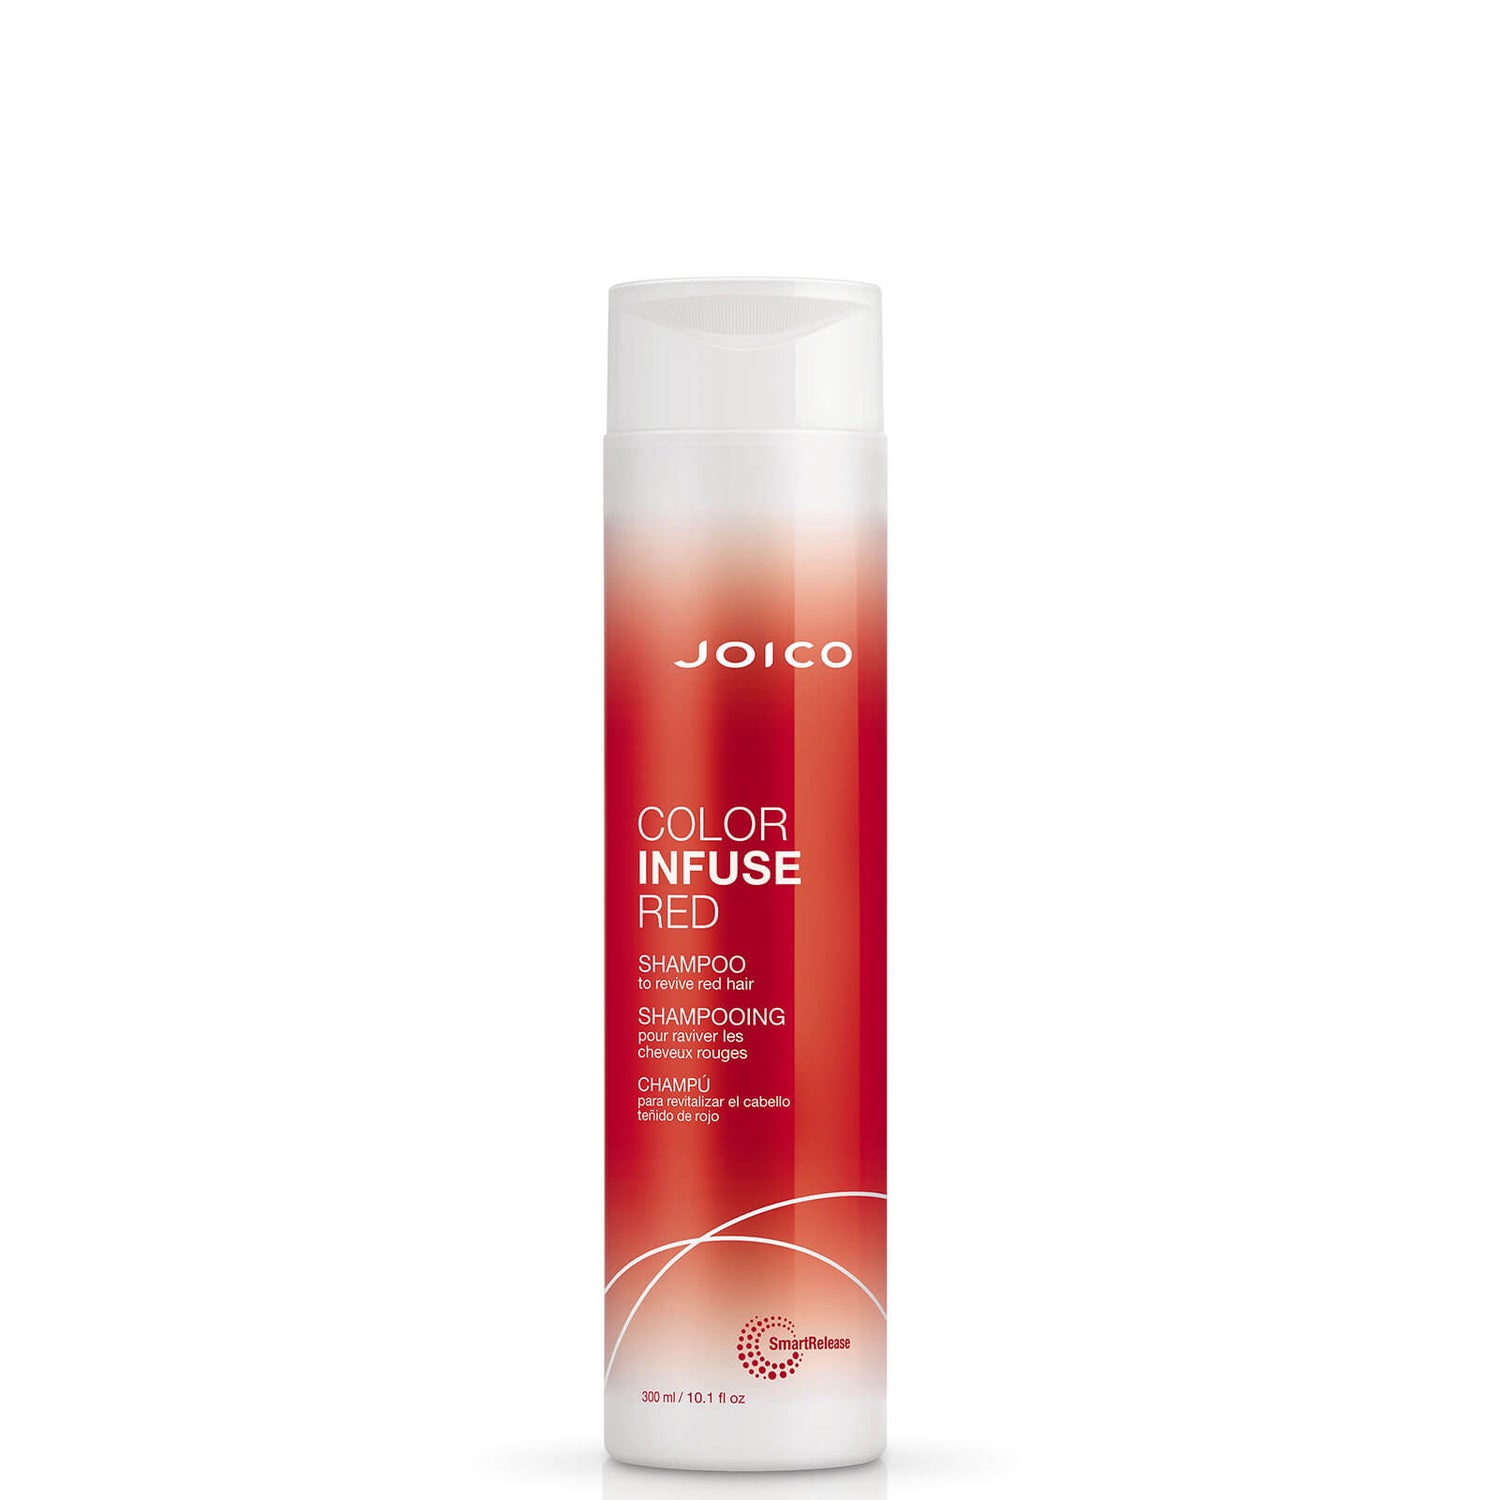 Joico Color Infuse红色头发洗发水 300ml